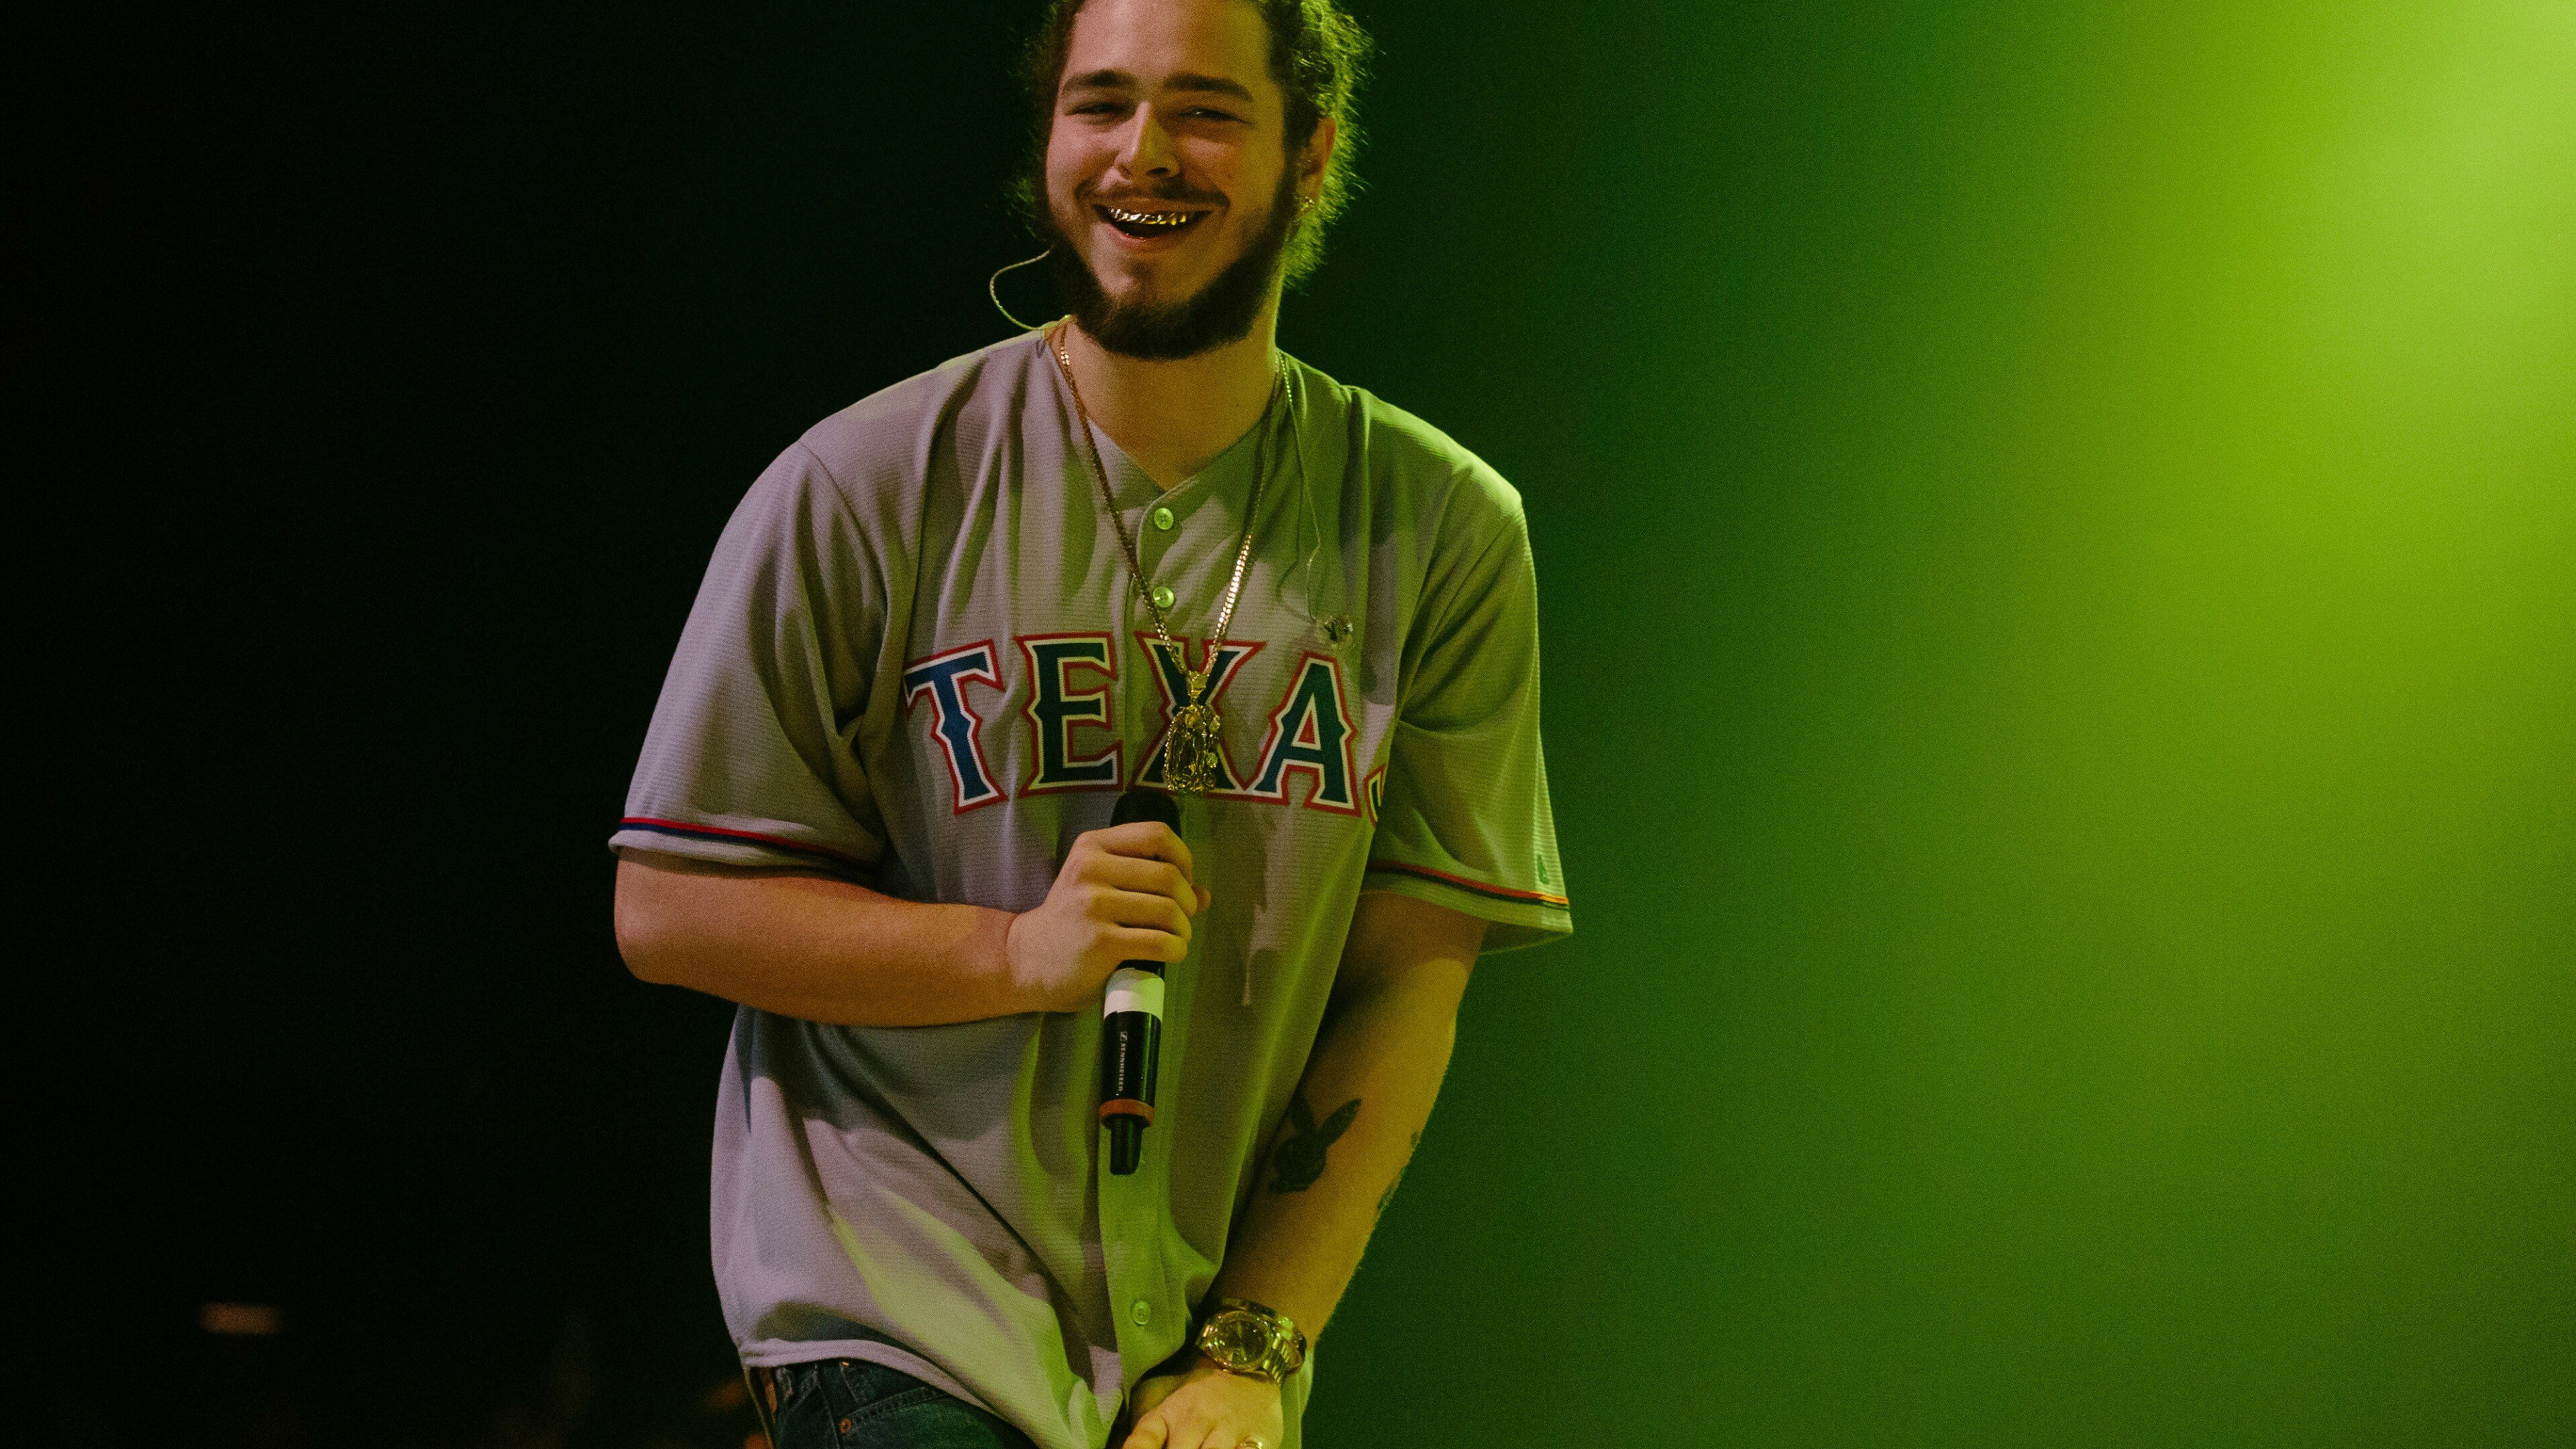 Post Malone: The singer has gained acclaim for blending genres and subgenres of hip hop, pop, R&B, and trap. 3840x2160 4K Wallpaper.